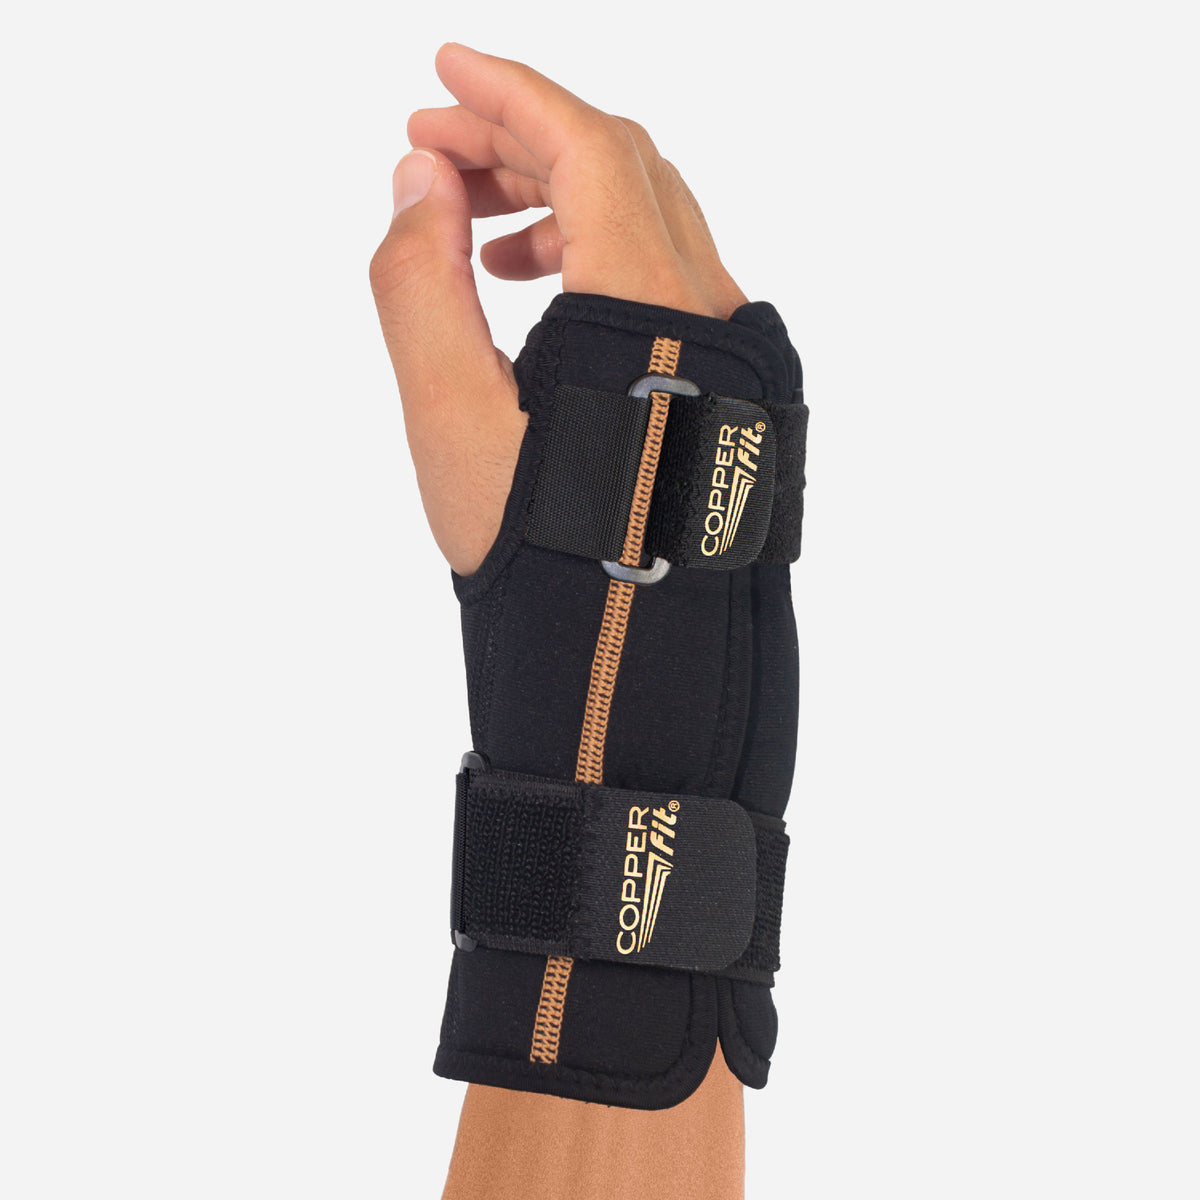 Copper Fit Rapid Relief Hand Wrist Brace Fits Right Dominican